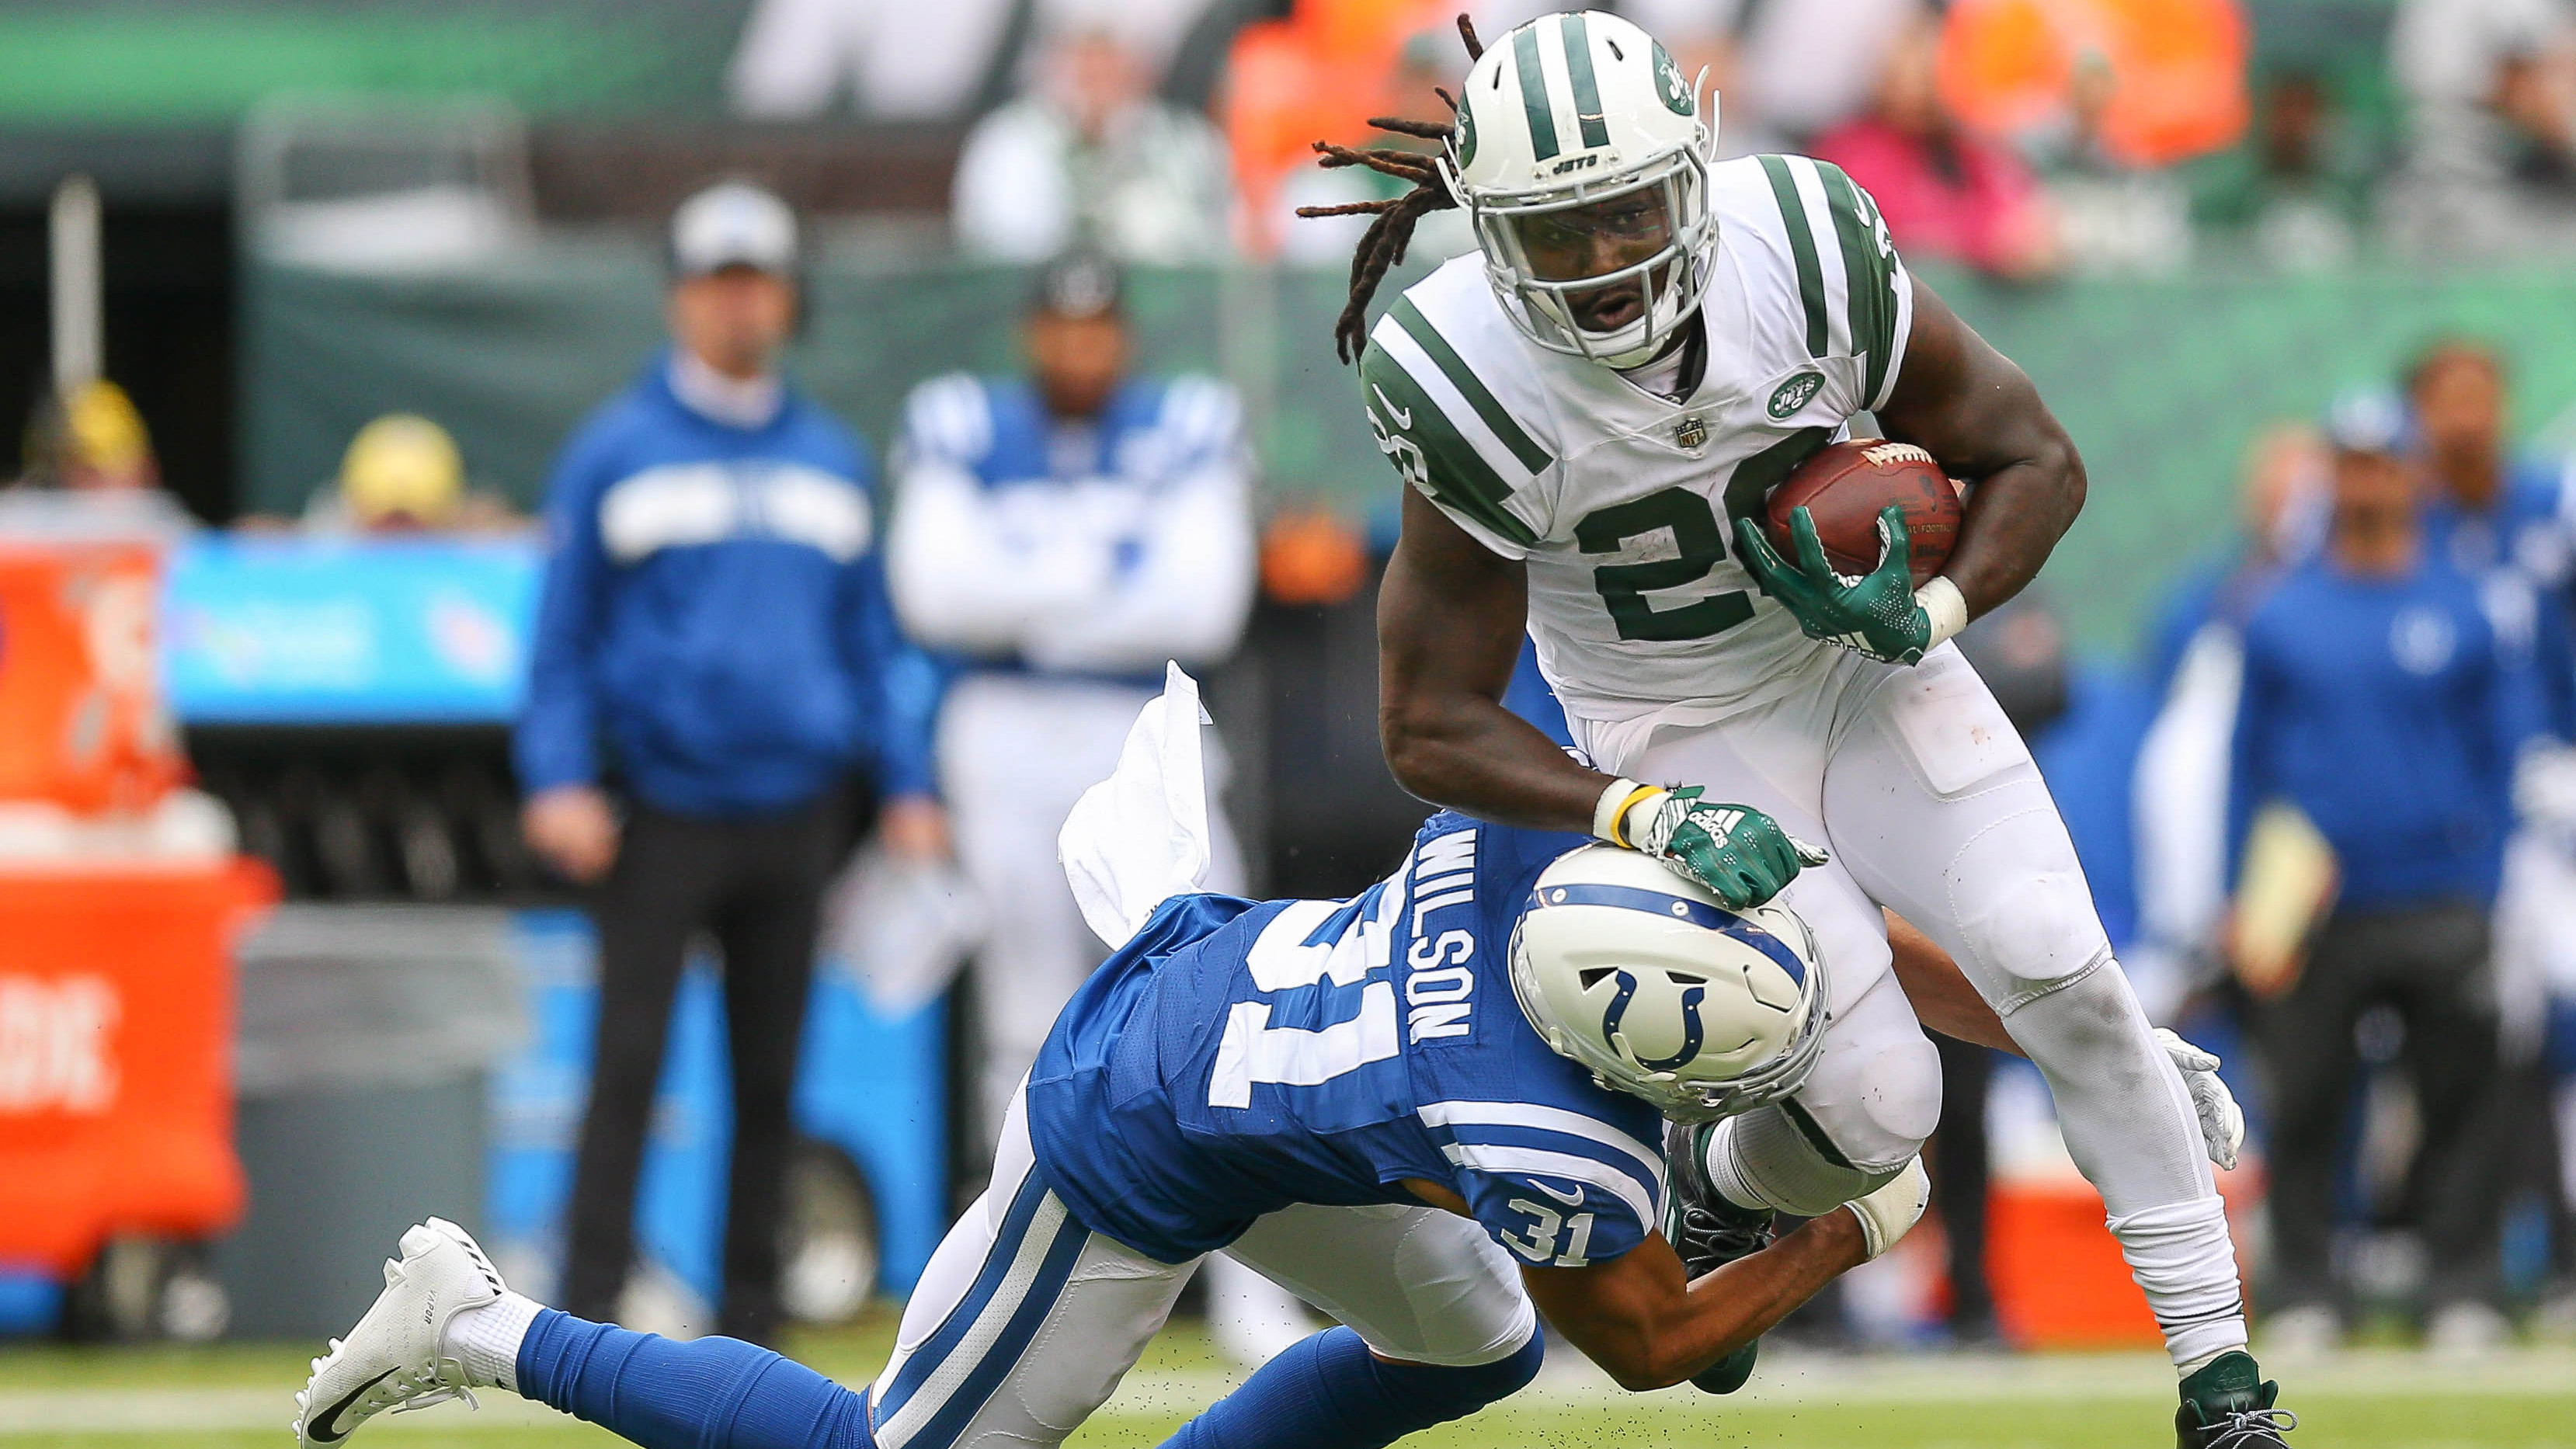 Colts drop fourth straight as Jets score on eight straight possessions